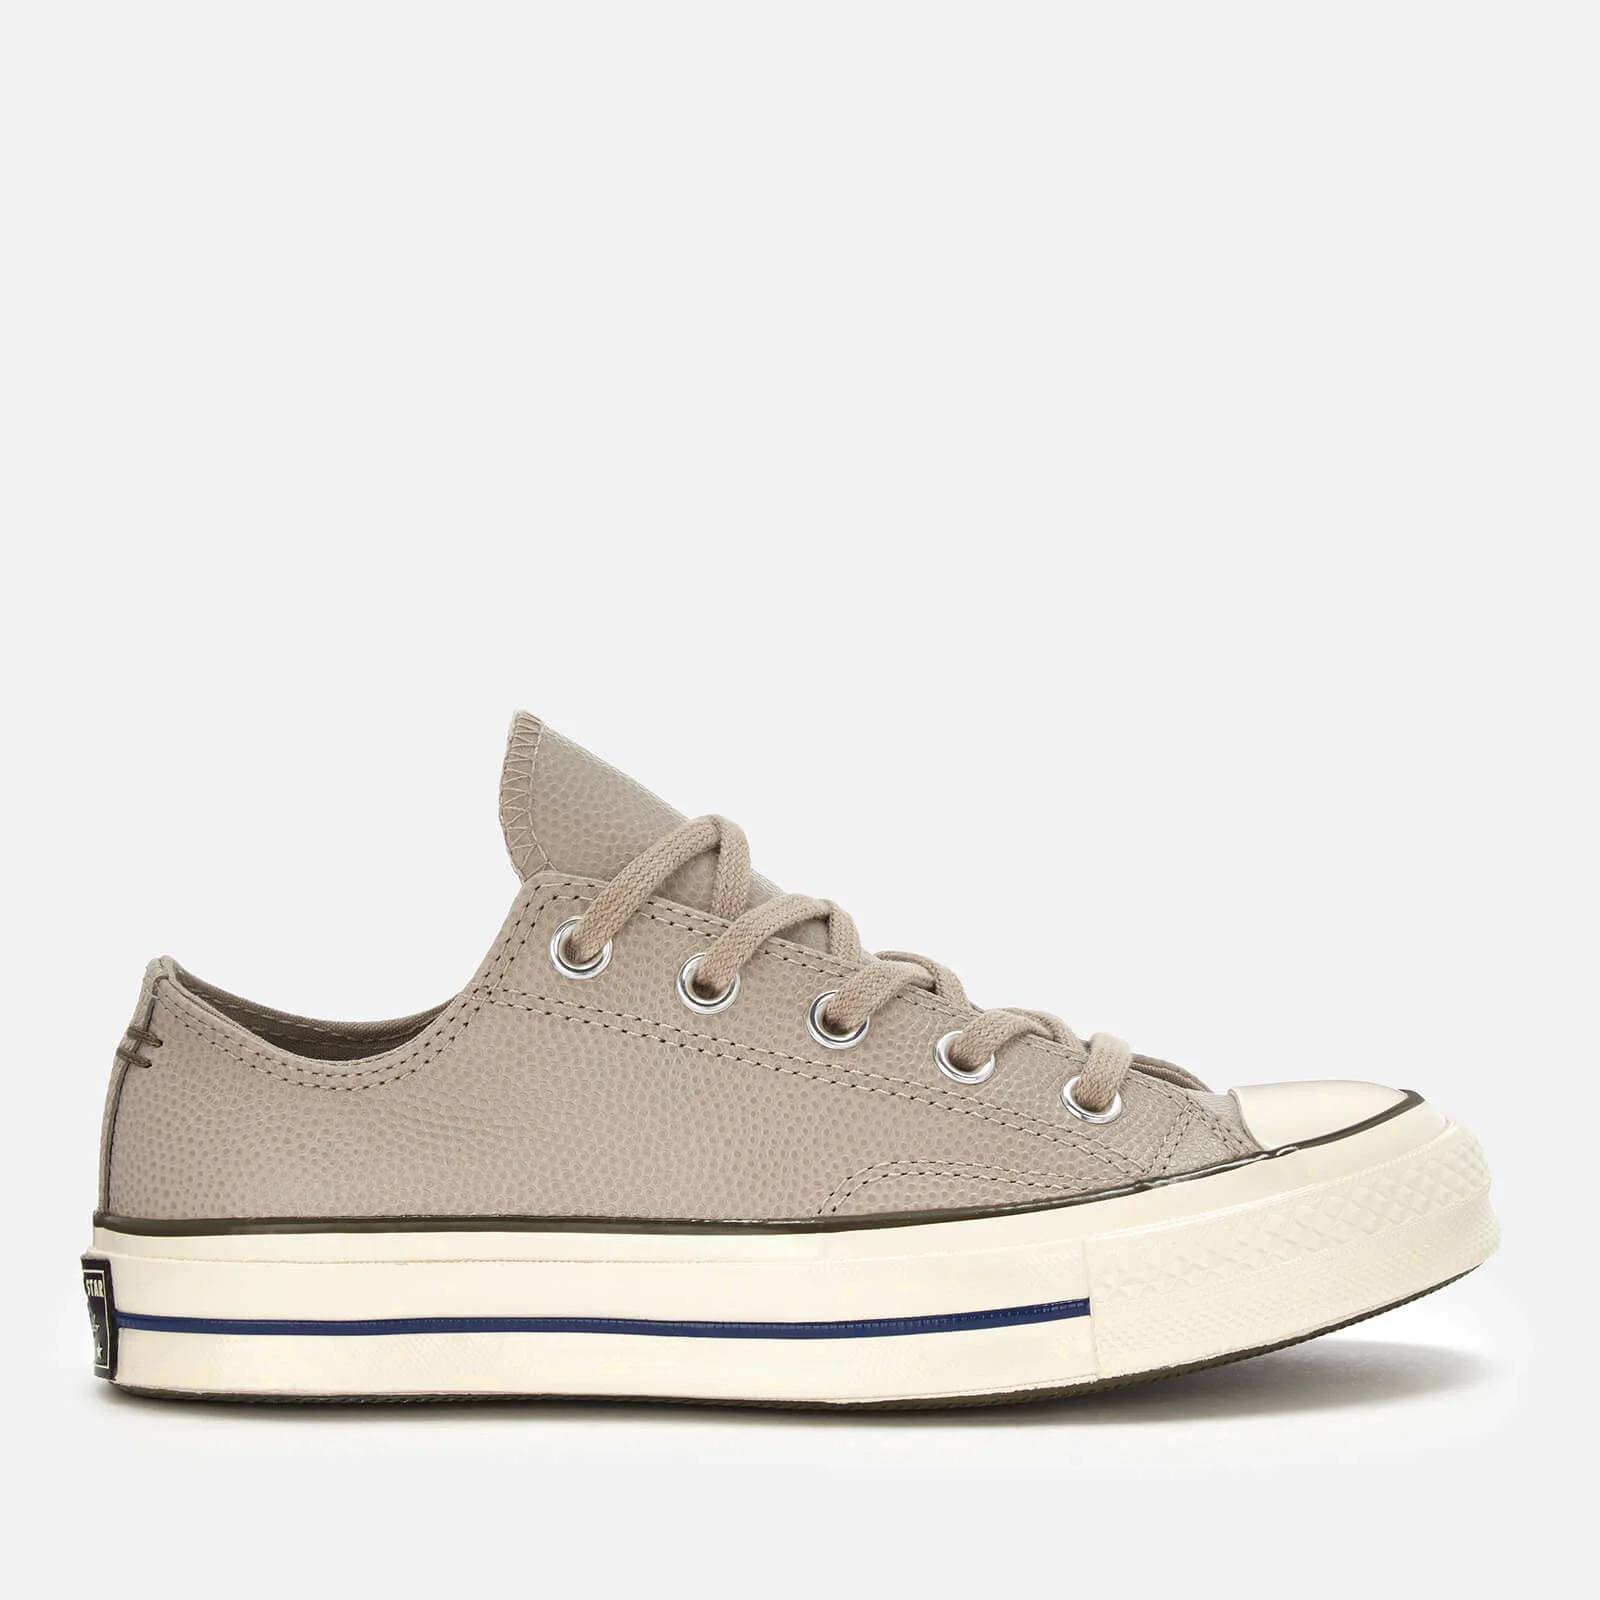 Converse Women's Chuck Taylor All Star 70 Ox Trainers - Papyrus/Field Surplus/Egret Image 1